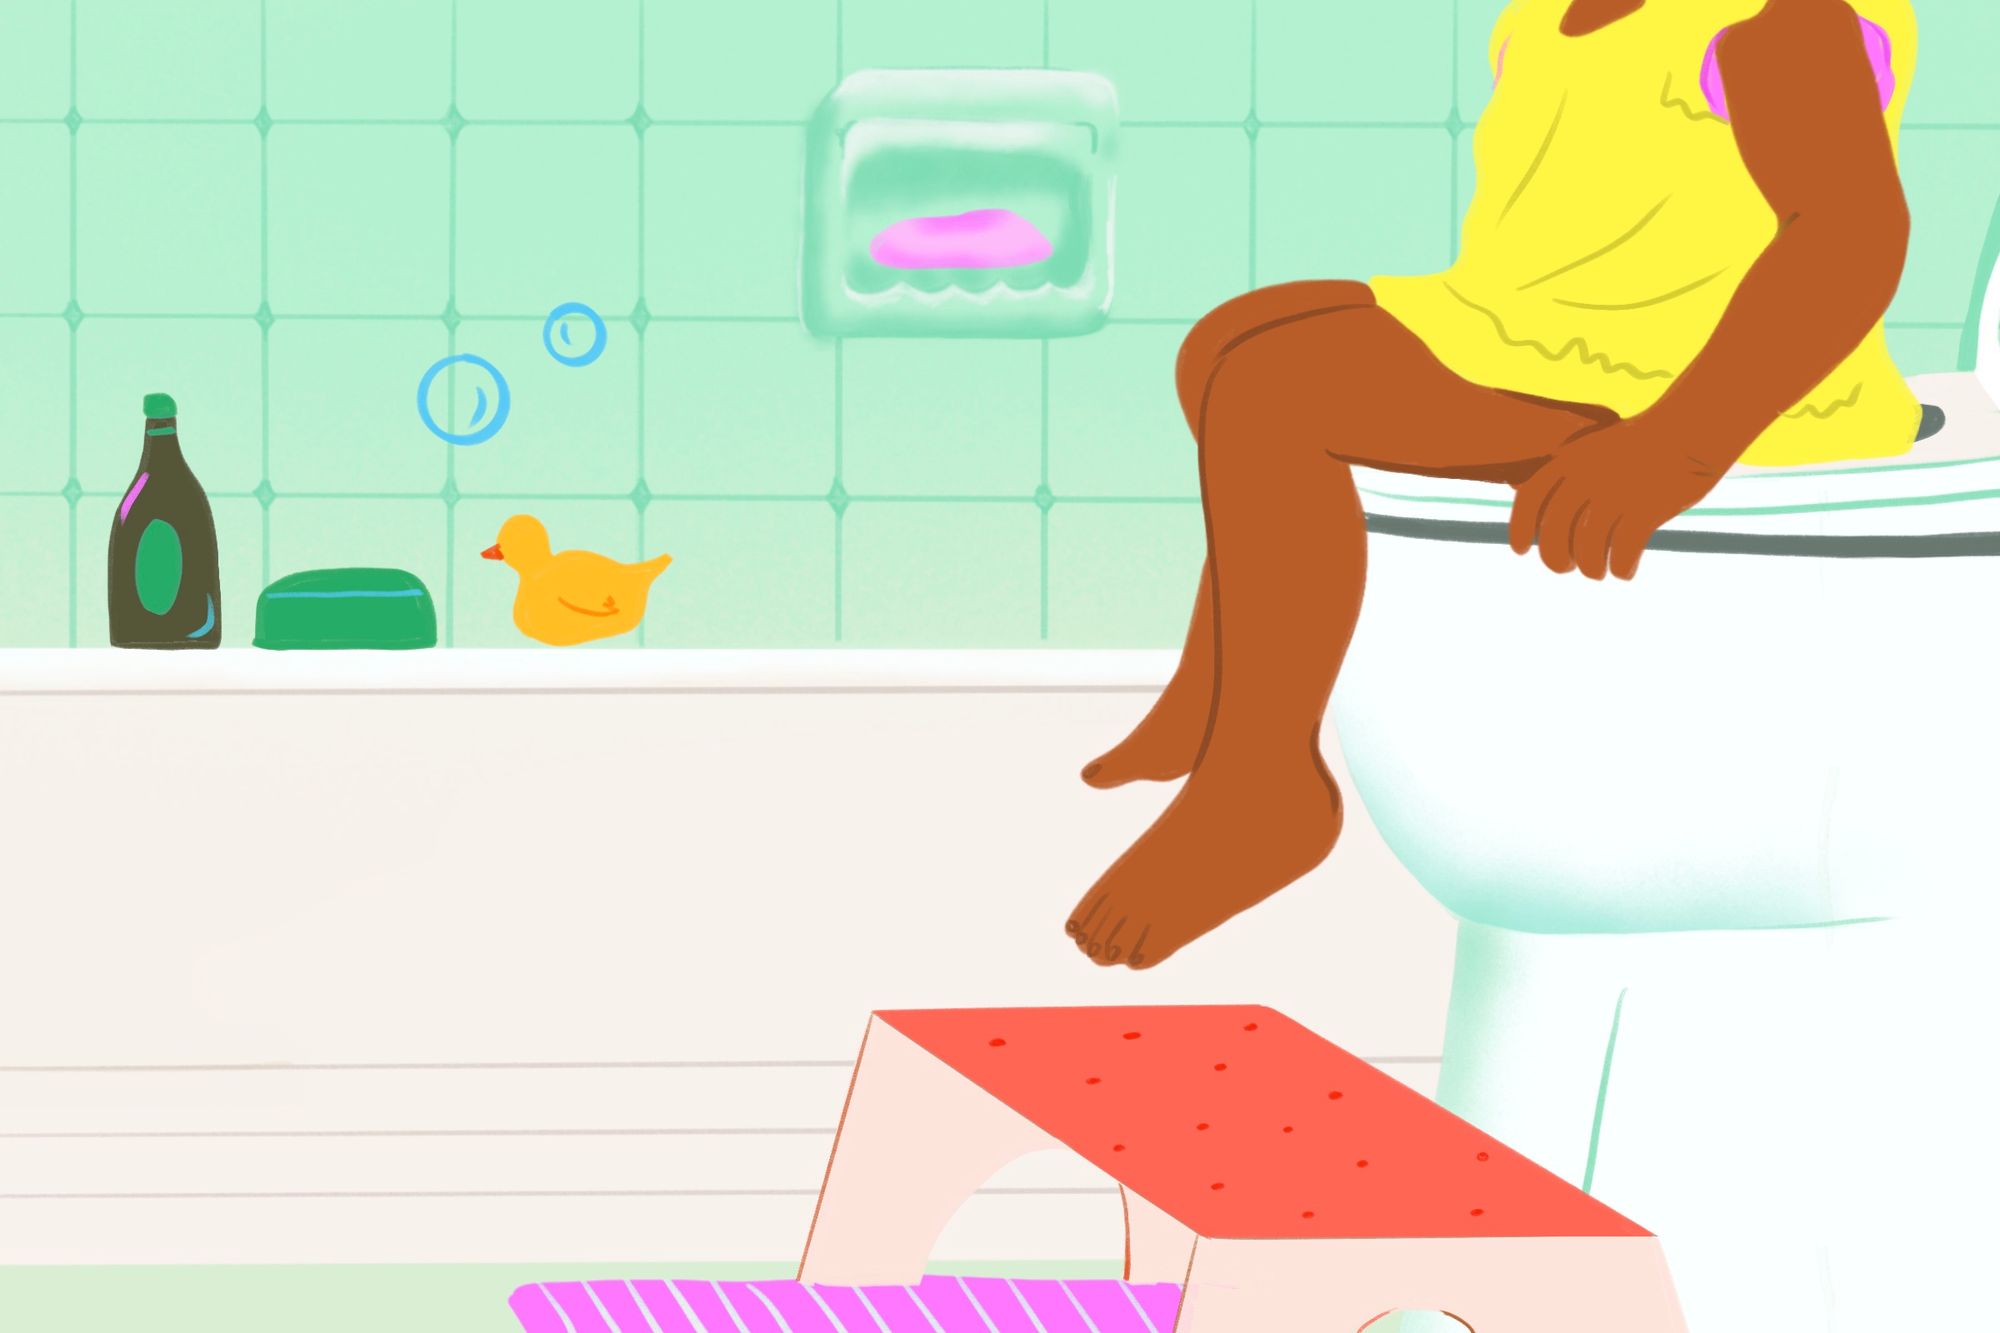 Child only using the potty when naked? Heres what to do.